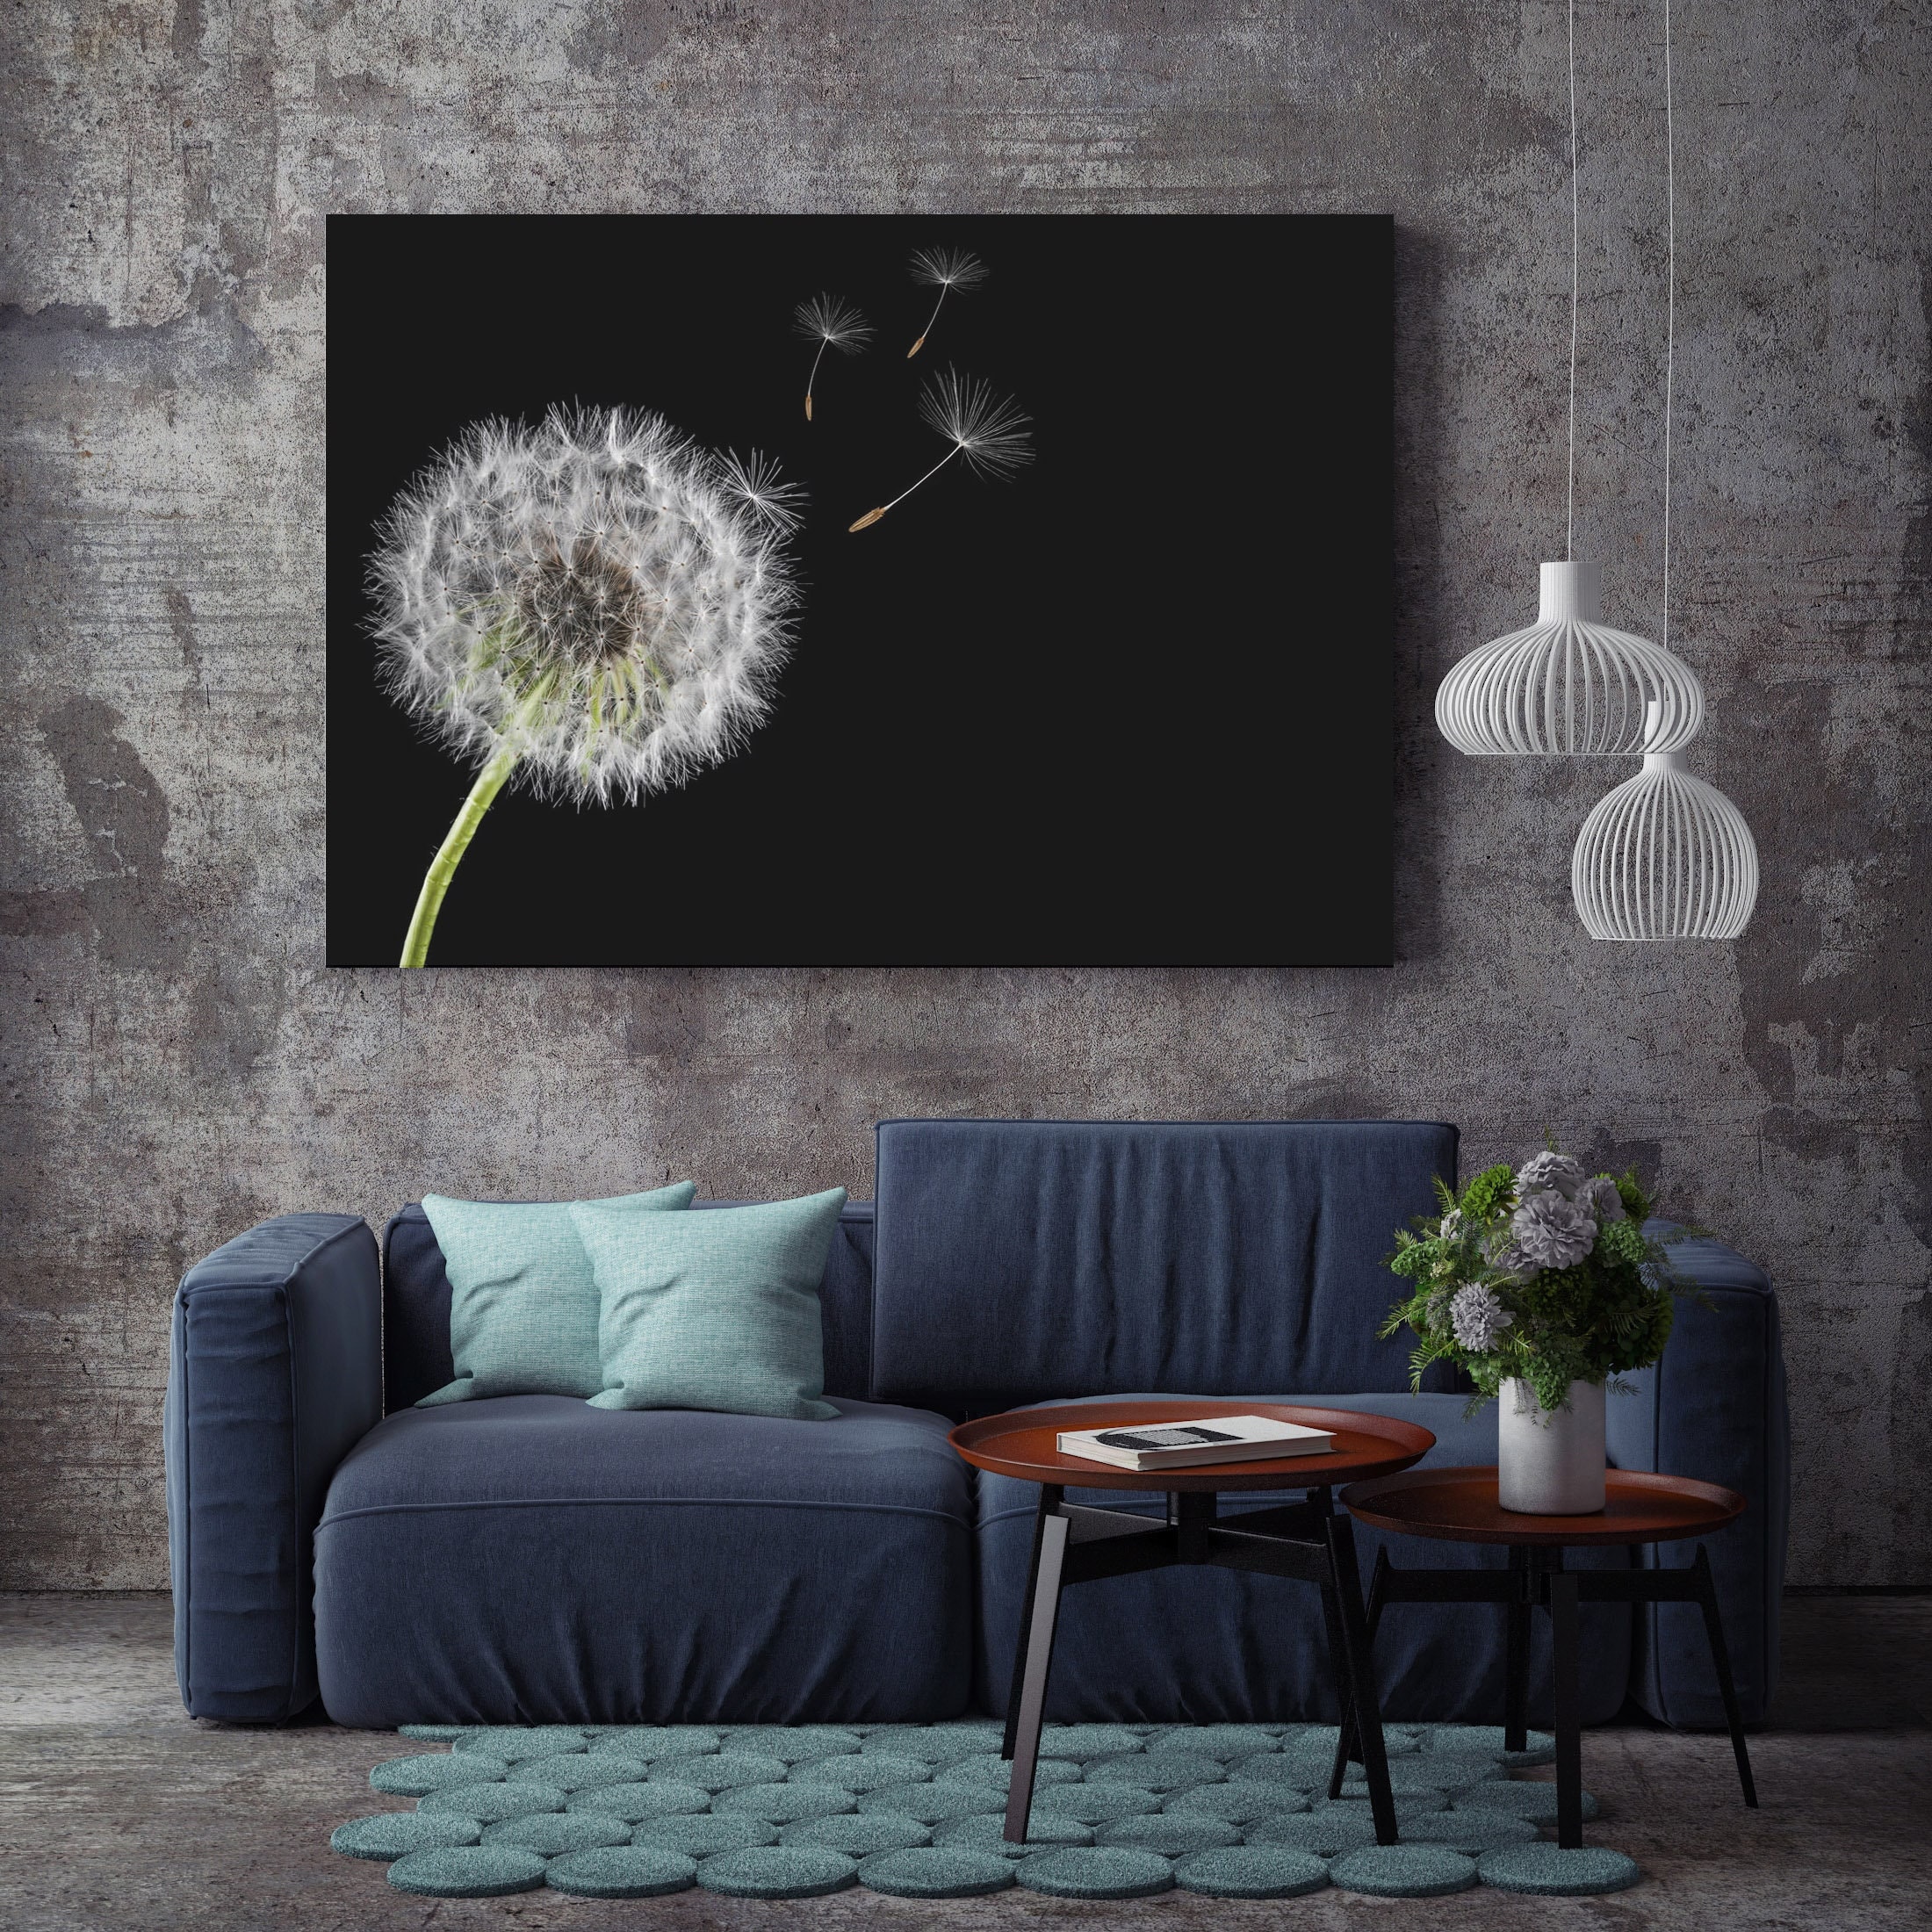 Wall Art Laminas Decorativas Pared Cuadros Posters And Prints Living Room  Bedroom Canvas Painting Dandelion Pictures for Wall